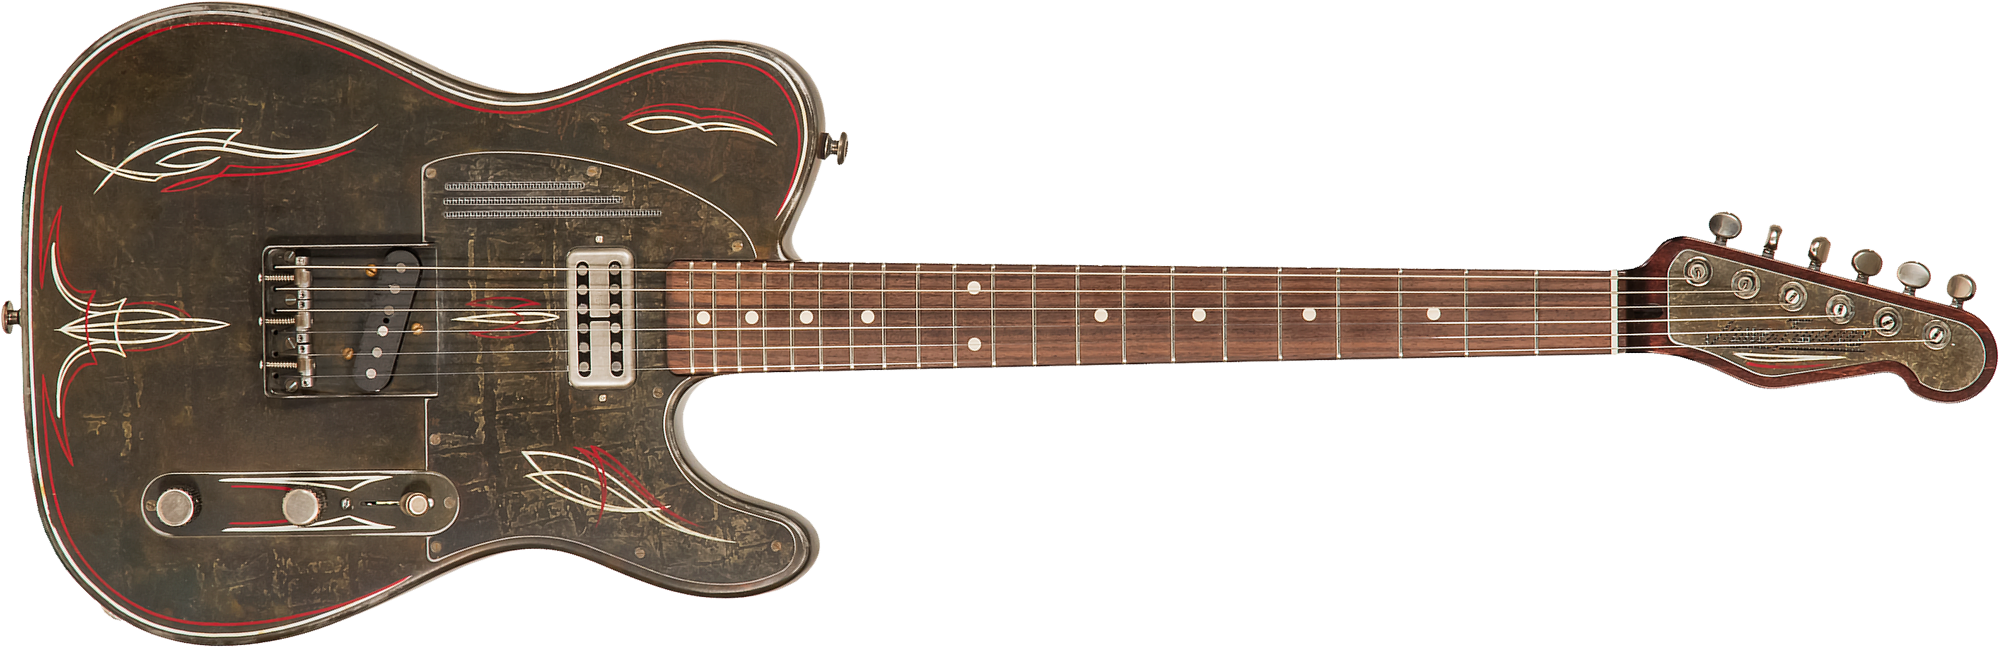 James Trussart Steelcaster Perf.back Sh Tv Jones Ht Rw #21167 - Rust O Matic Pinstriped - Tel shape electric guitar - Main picture